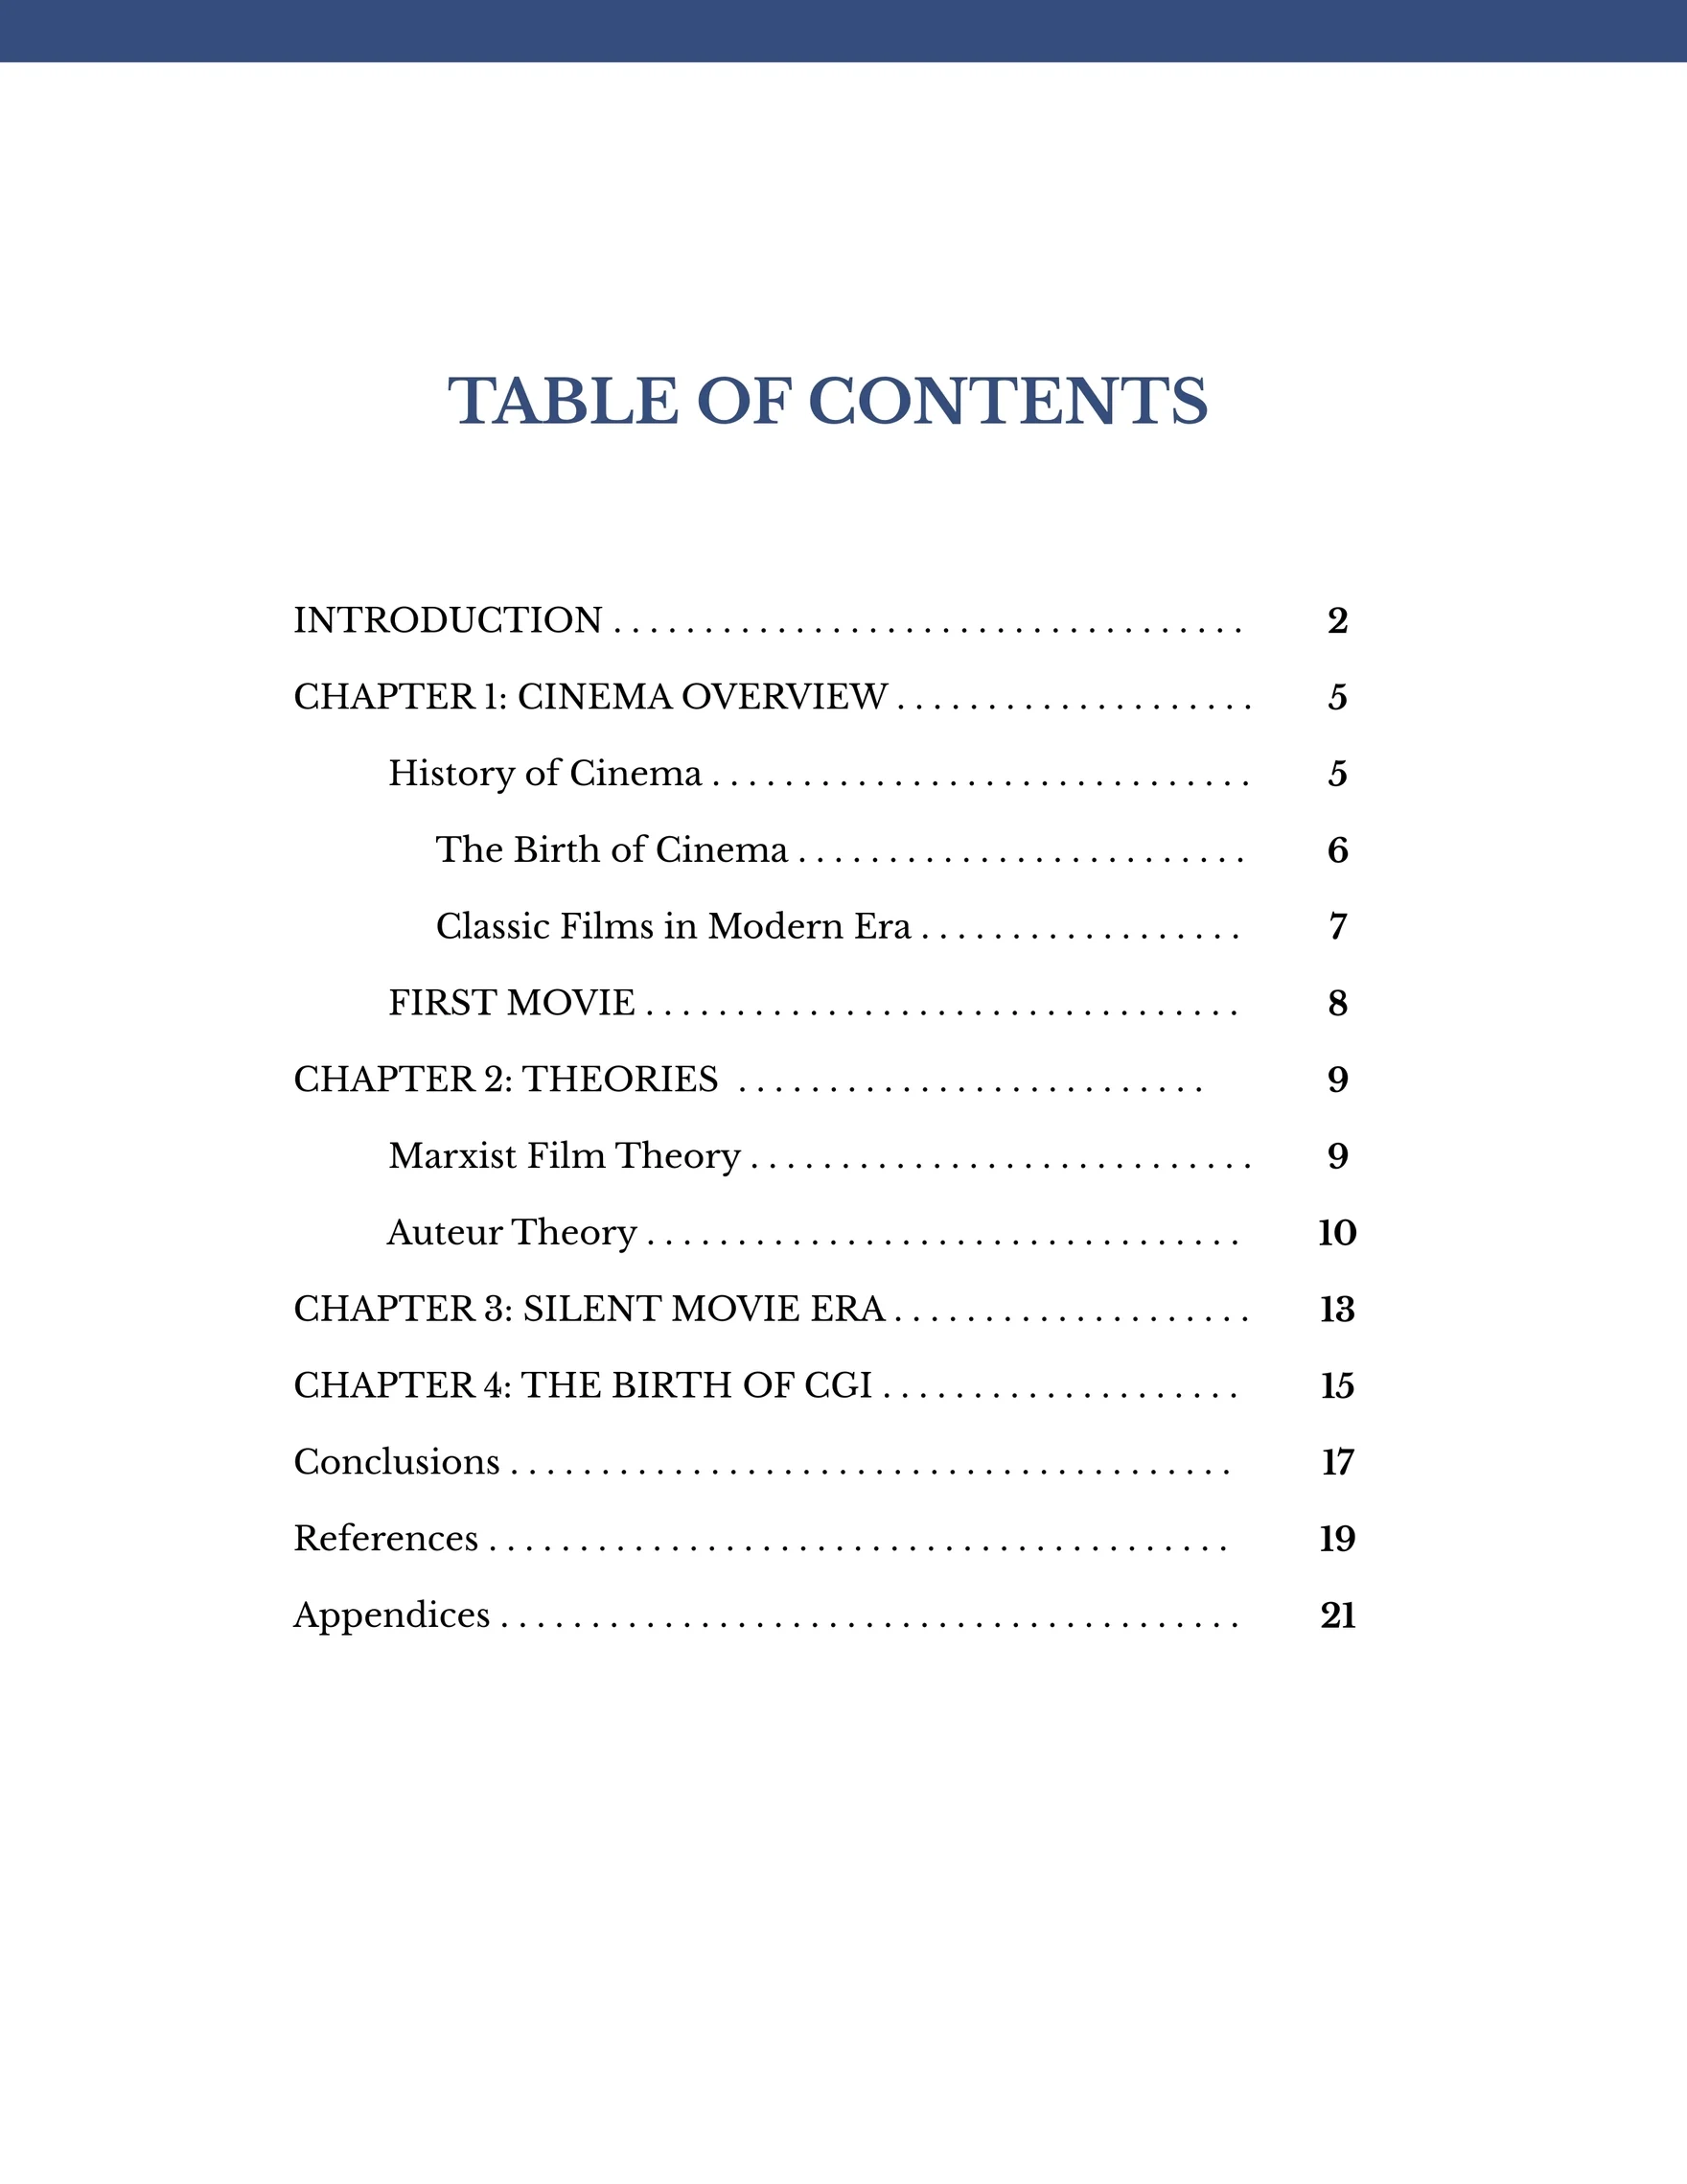 apa table of content template